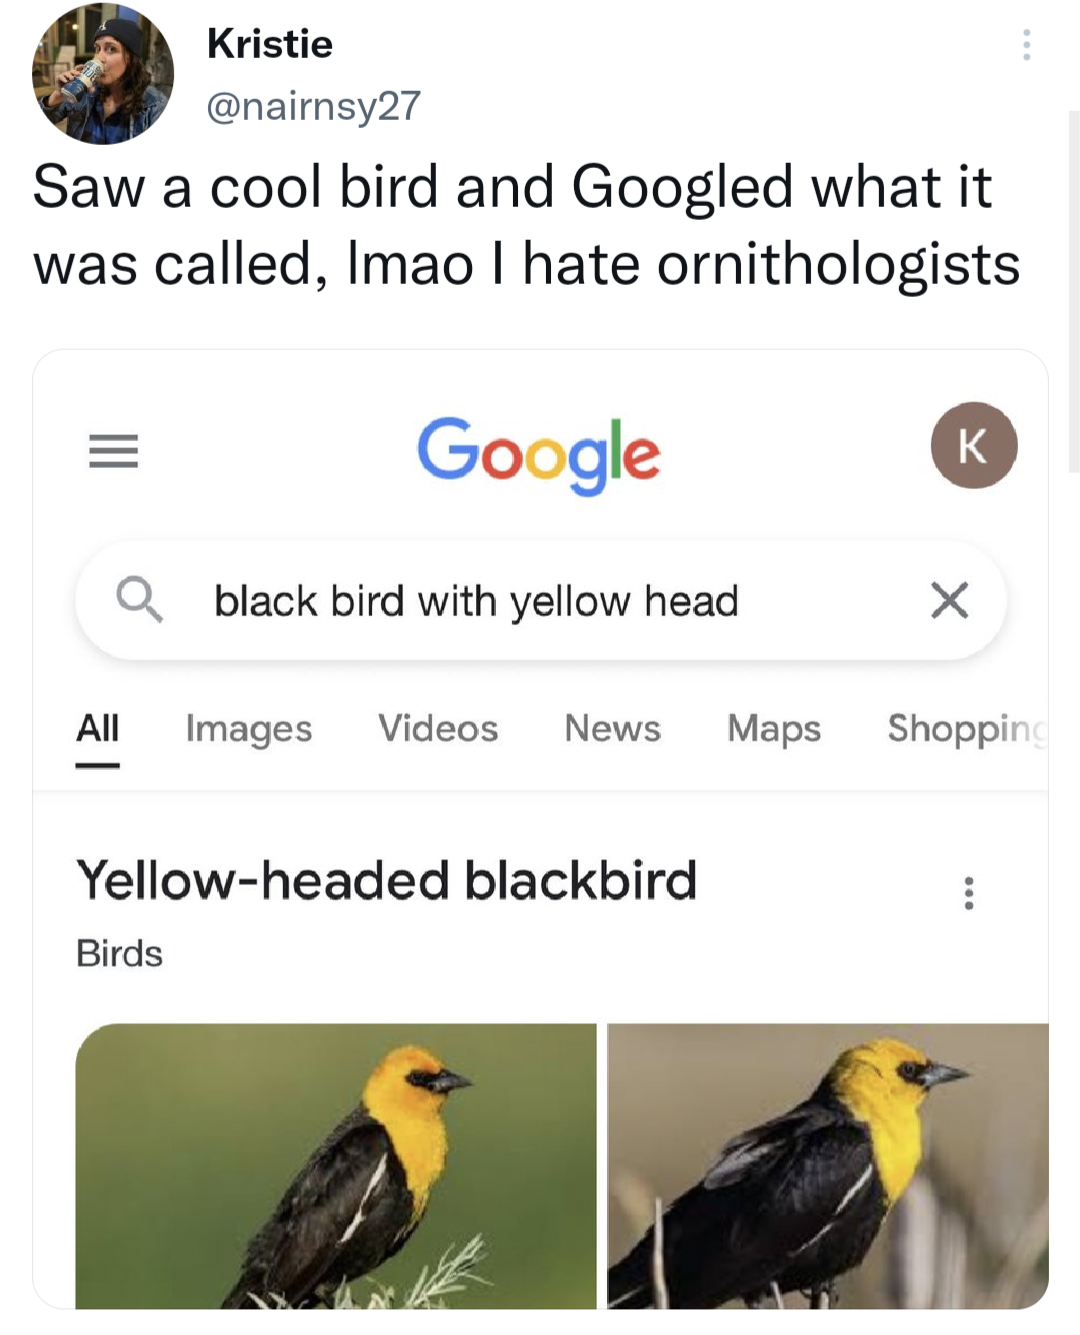 dank memes - google new - Kristie Saw a cool bird and Googled what it was called, Imao I hate ornithologists Google K Qblack bird with yellow head All Images Videos News Maps Yellowheaded blackbird Birds X Shopping